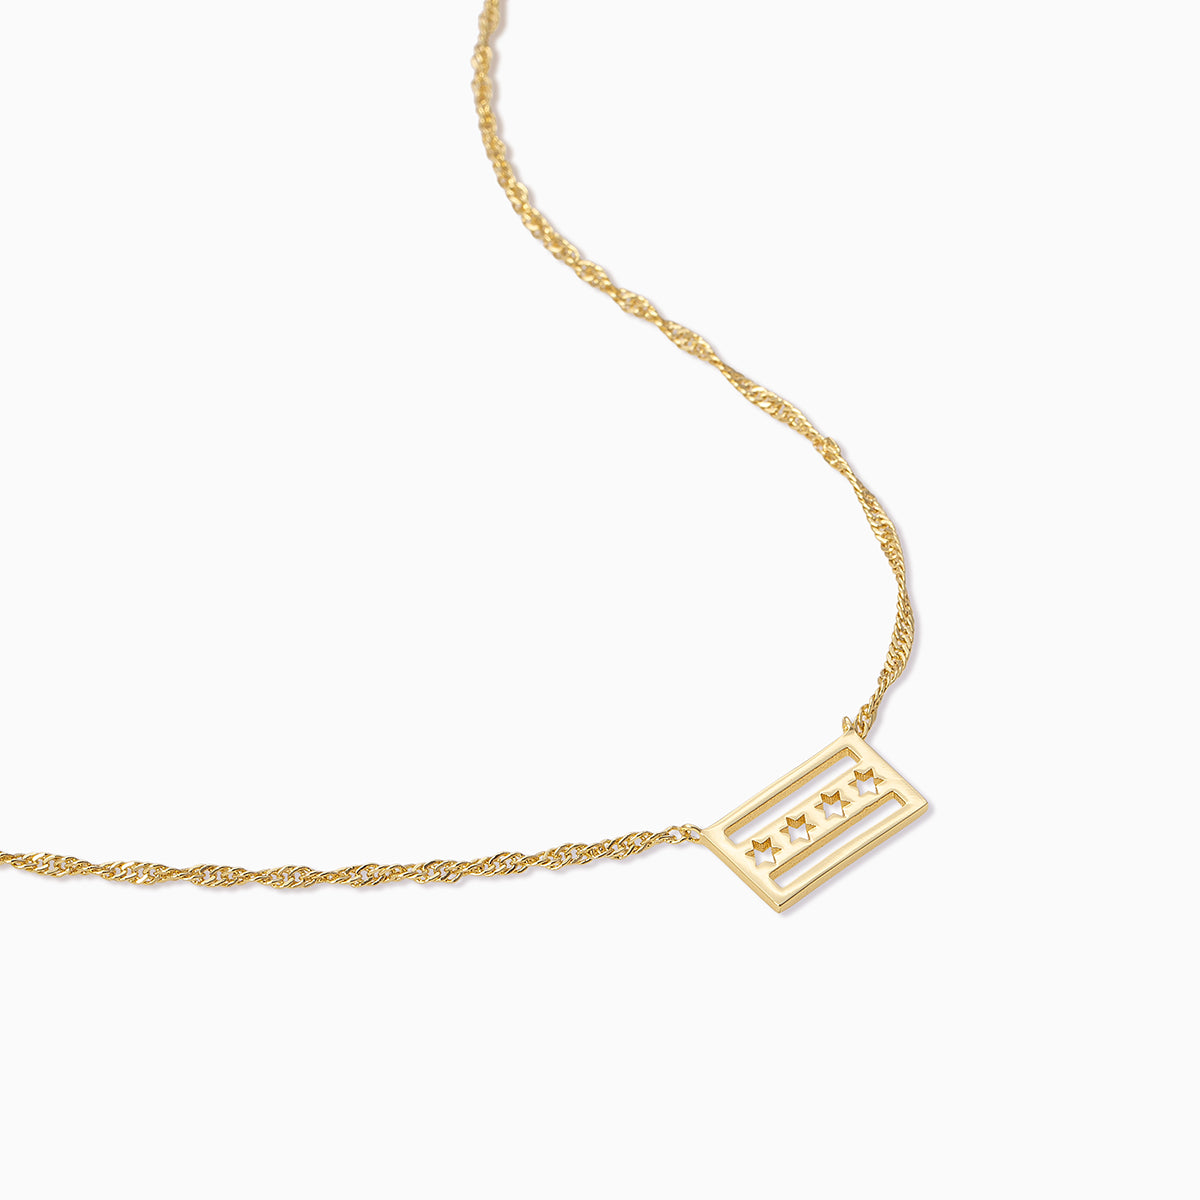 Chicago Flag Chain and Pendant Necklace in Gold